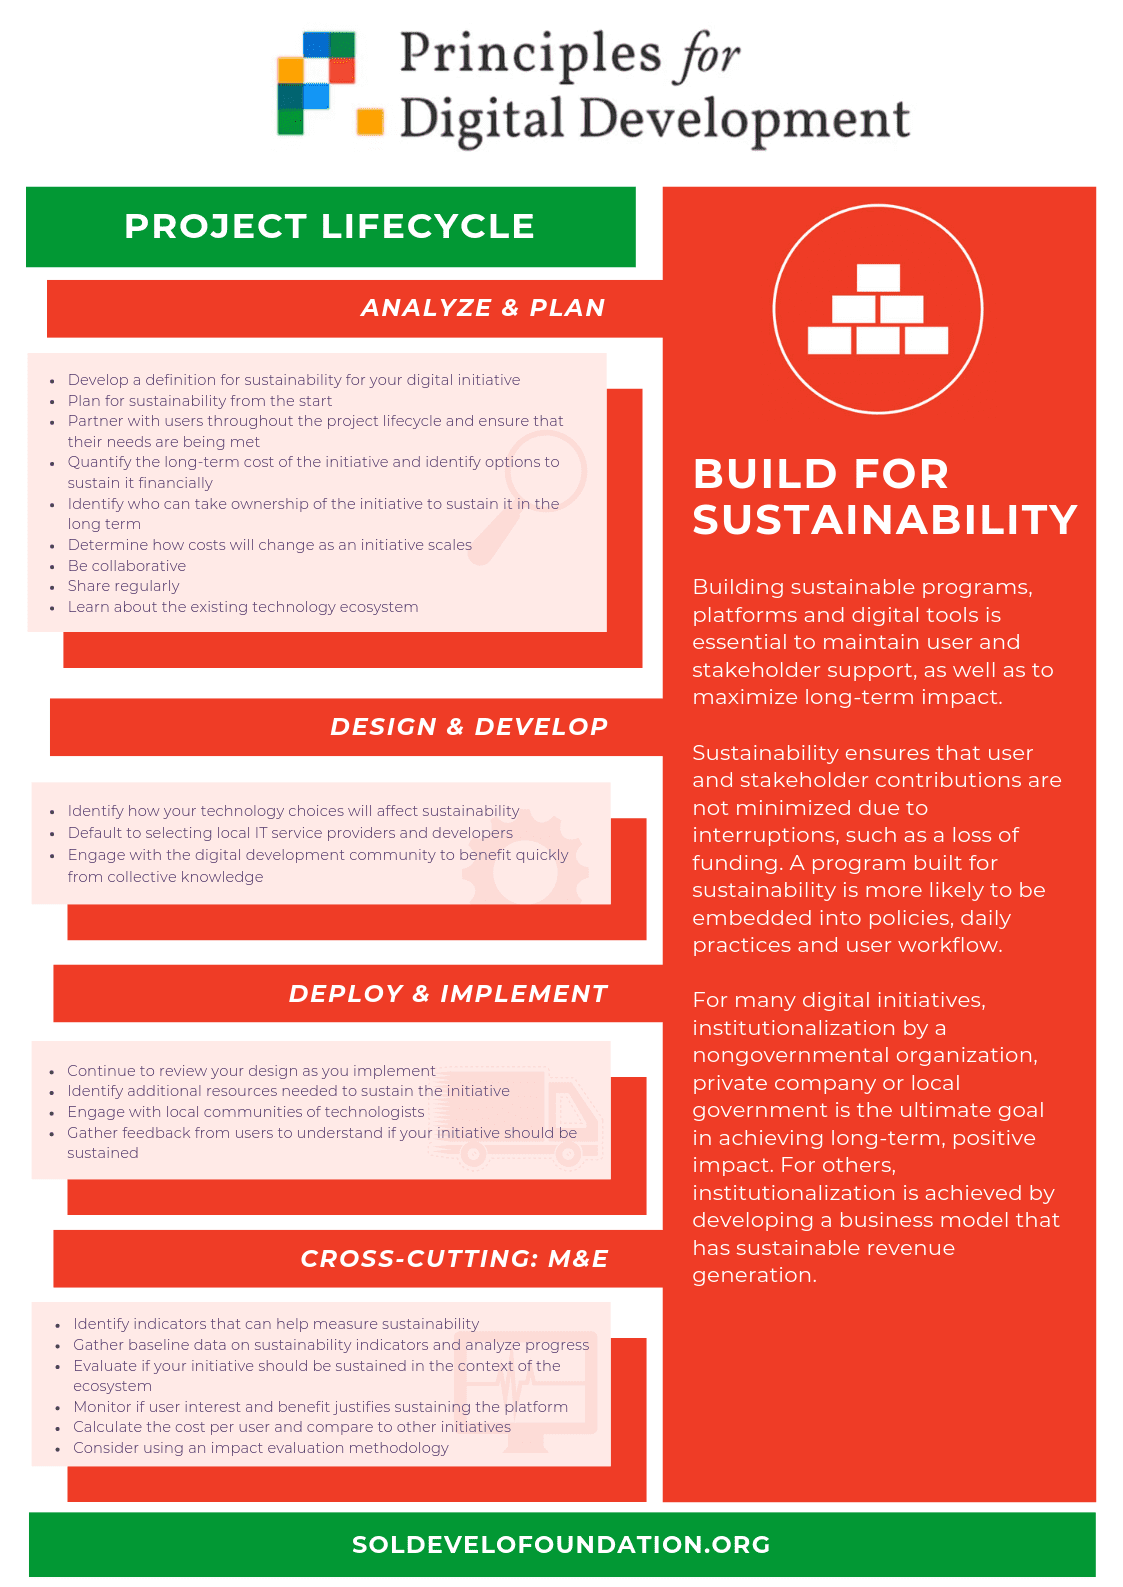 Build for Sustainability digital principles